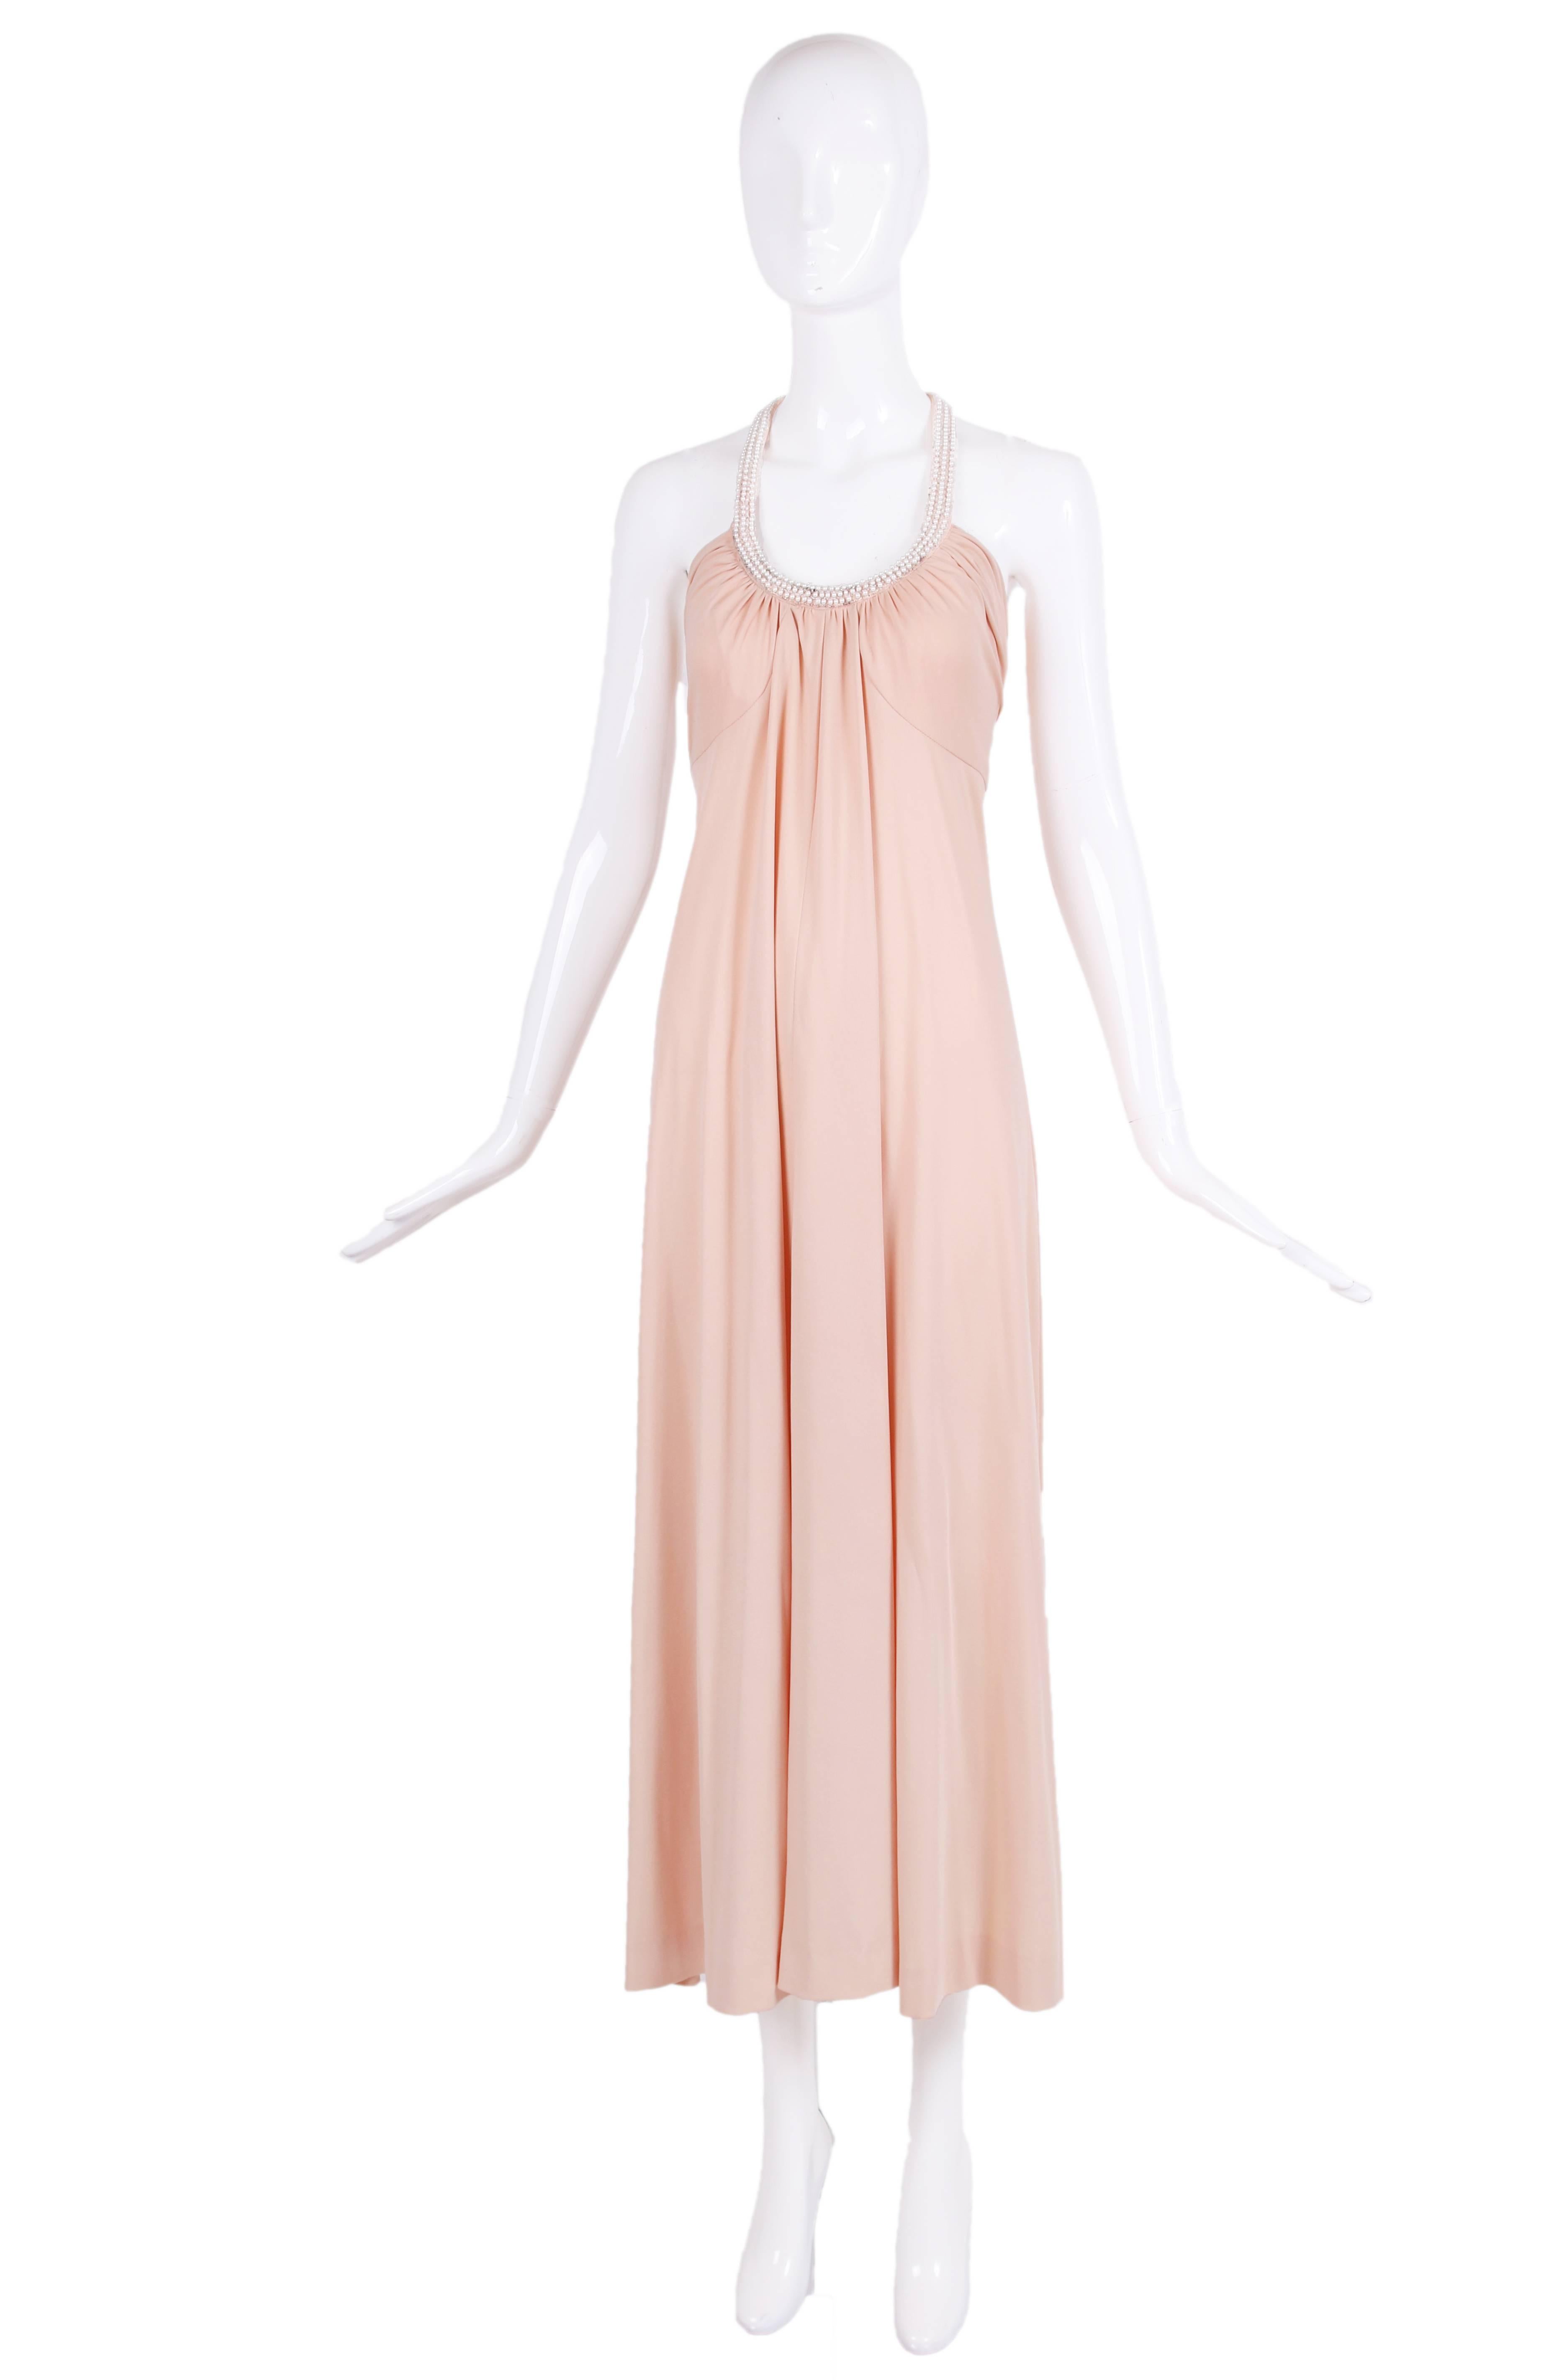 1970's Donald Brooks boutique blush pink jersey gown with pearl and beads decorating the halter neck. In excellent condition with some scattered missing beads - looks like someone might have removed the interior lining. No size tag - please consult